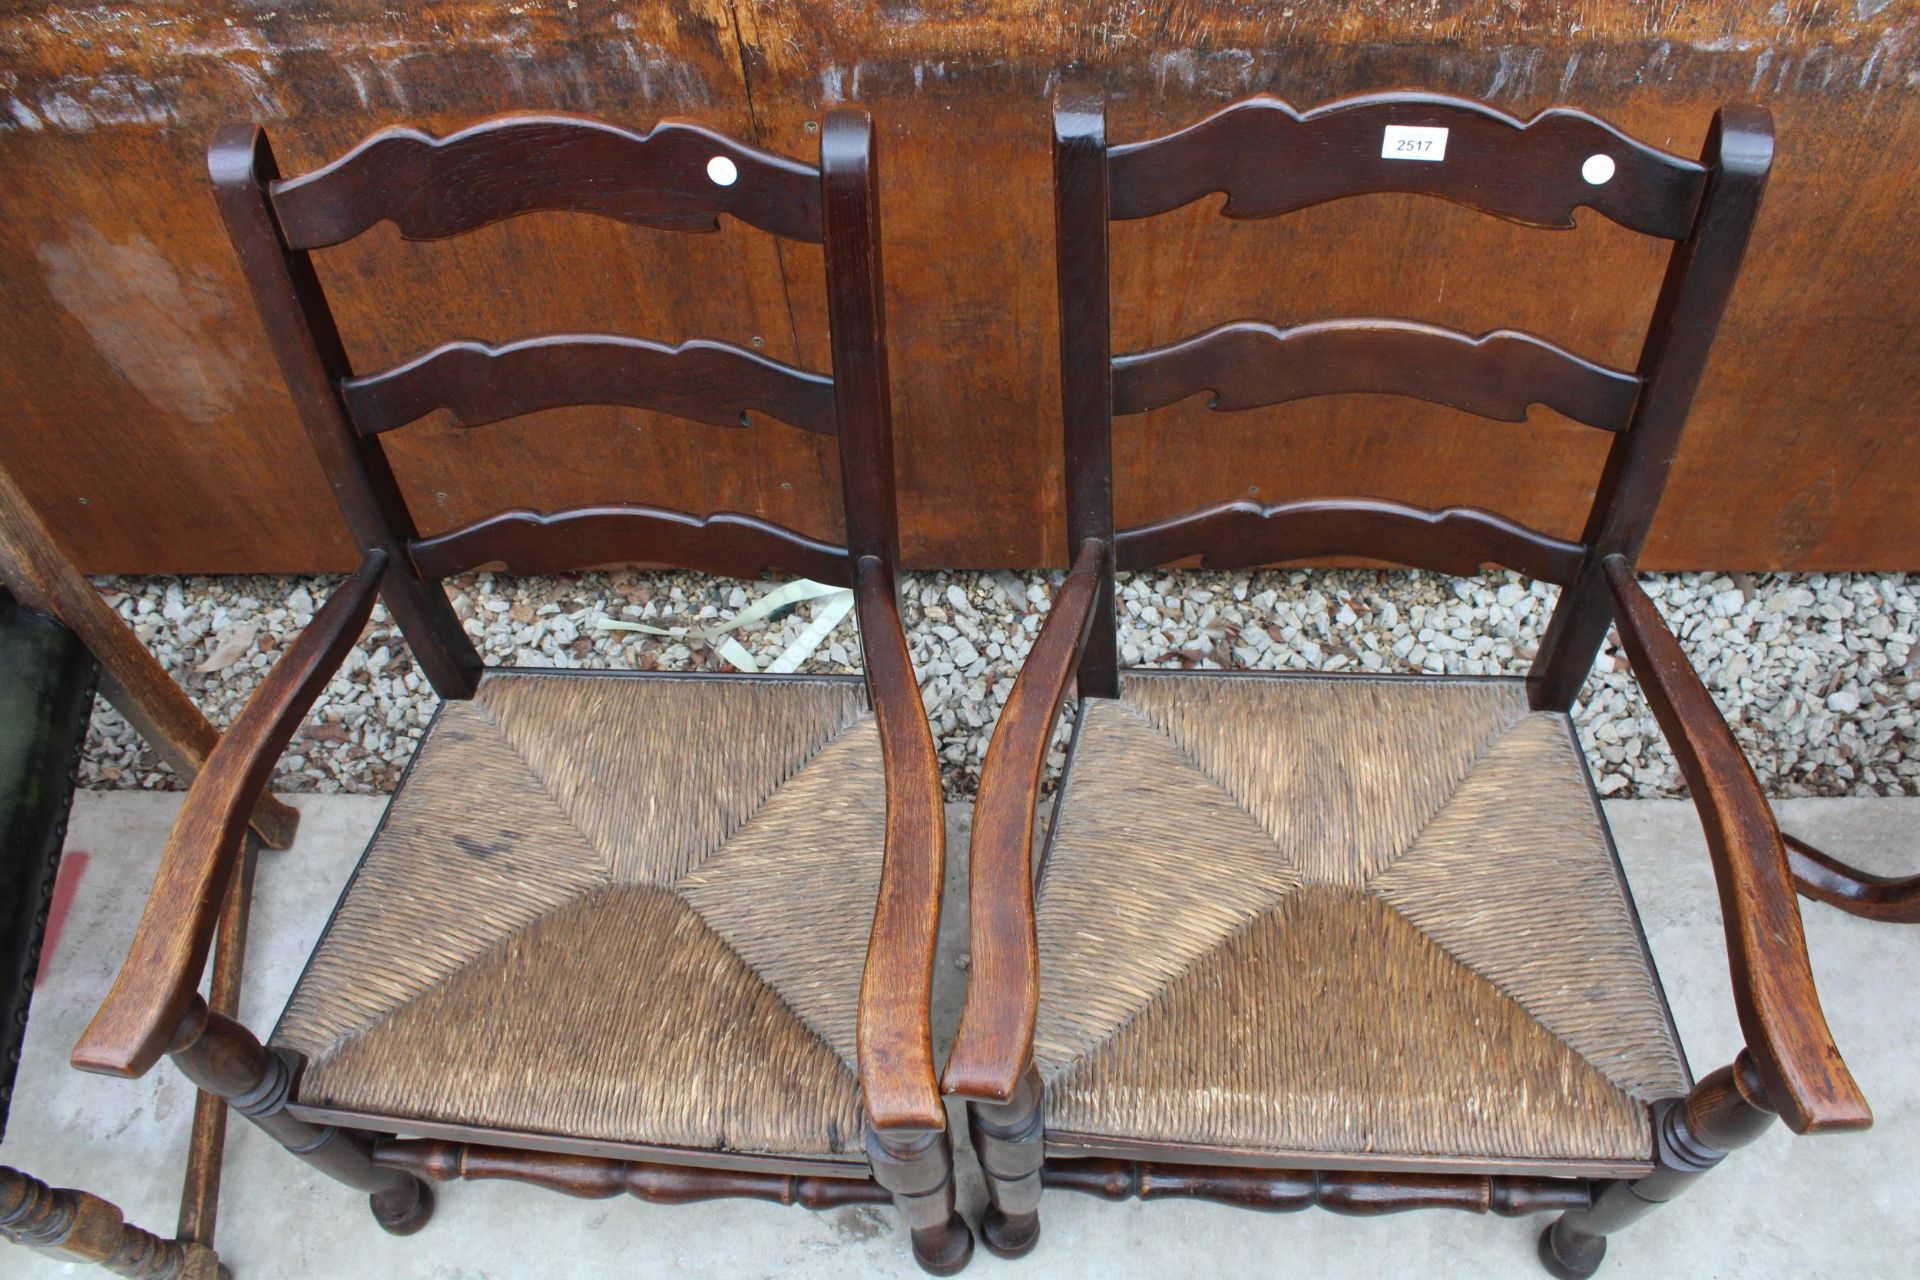 A PAIR OF 18TH CENTURY STYLE LOW OAK LADDER-BACK ELBOW CHAIRS WITH RUSH SEATS - Image 3 of 3